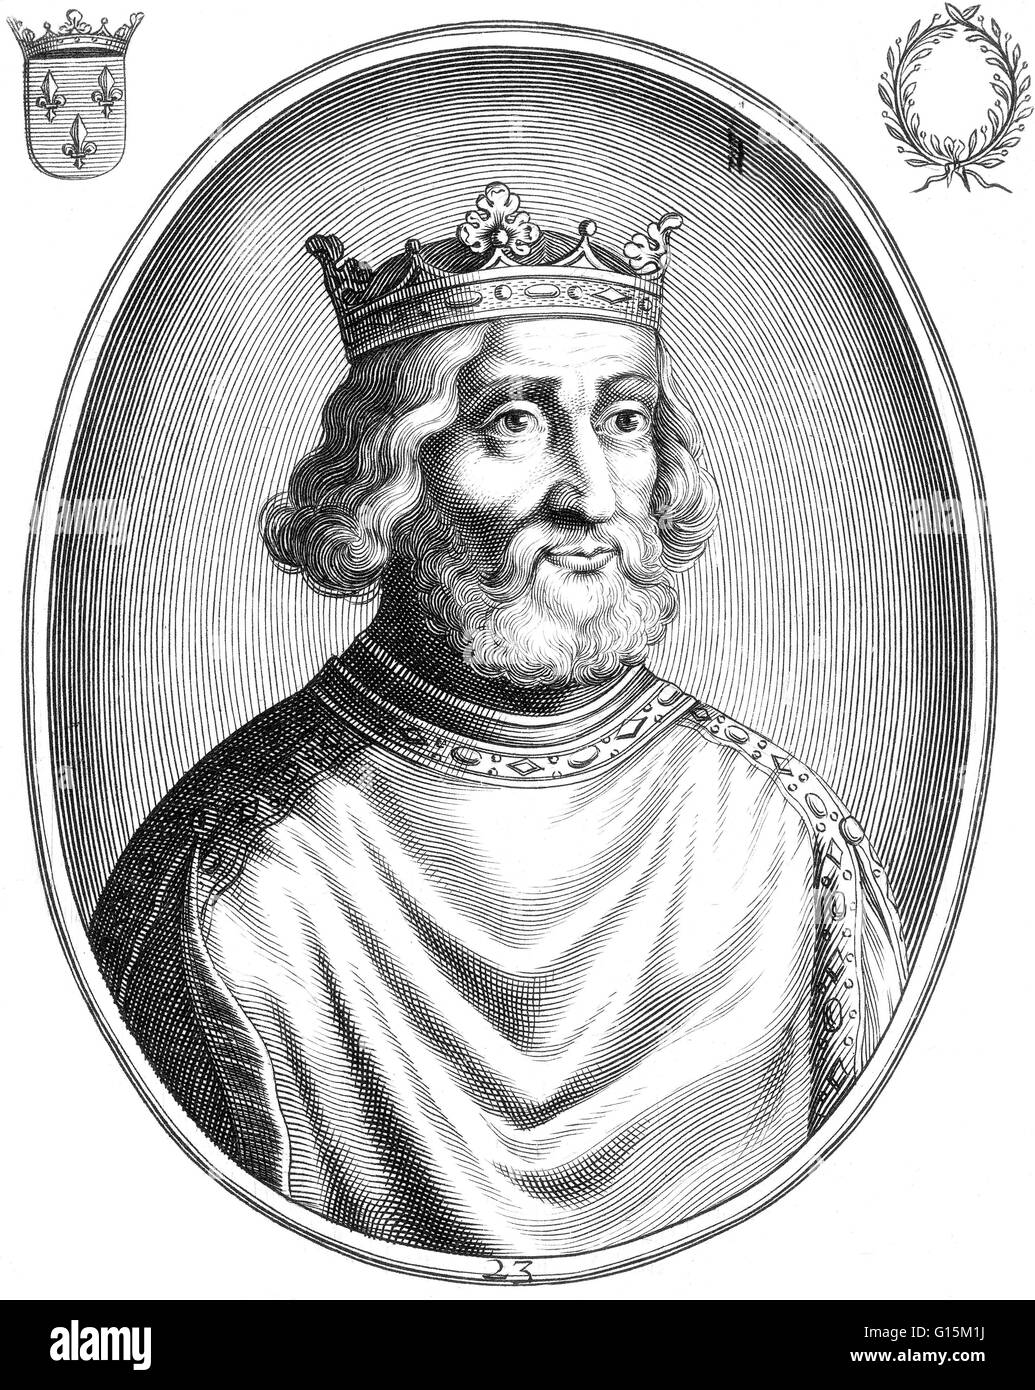 Pepin the Younger (714-768) was the first King of the Franks of the Carolingian dynasty. In 741 he and his brother Carloman succeeded their father, Charles Martel, as mayors of the palace and de facto rulers of the kingdom during an interregnum (737-743). Stock Photo